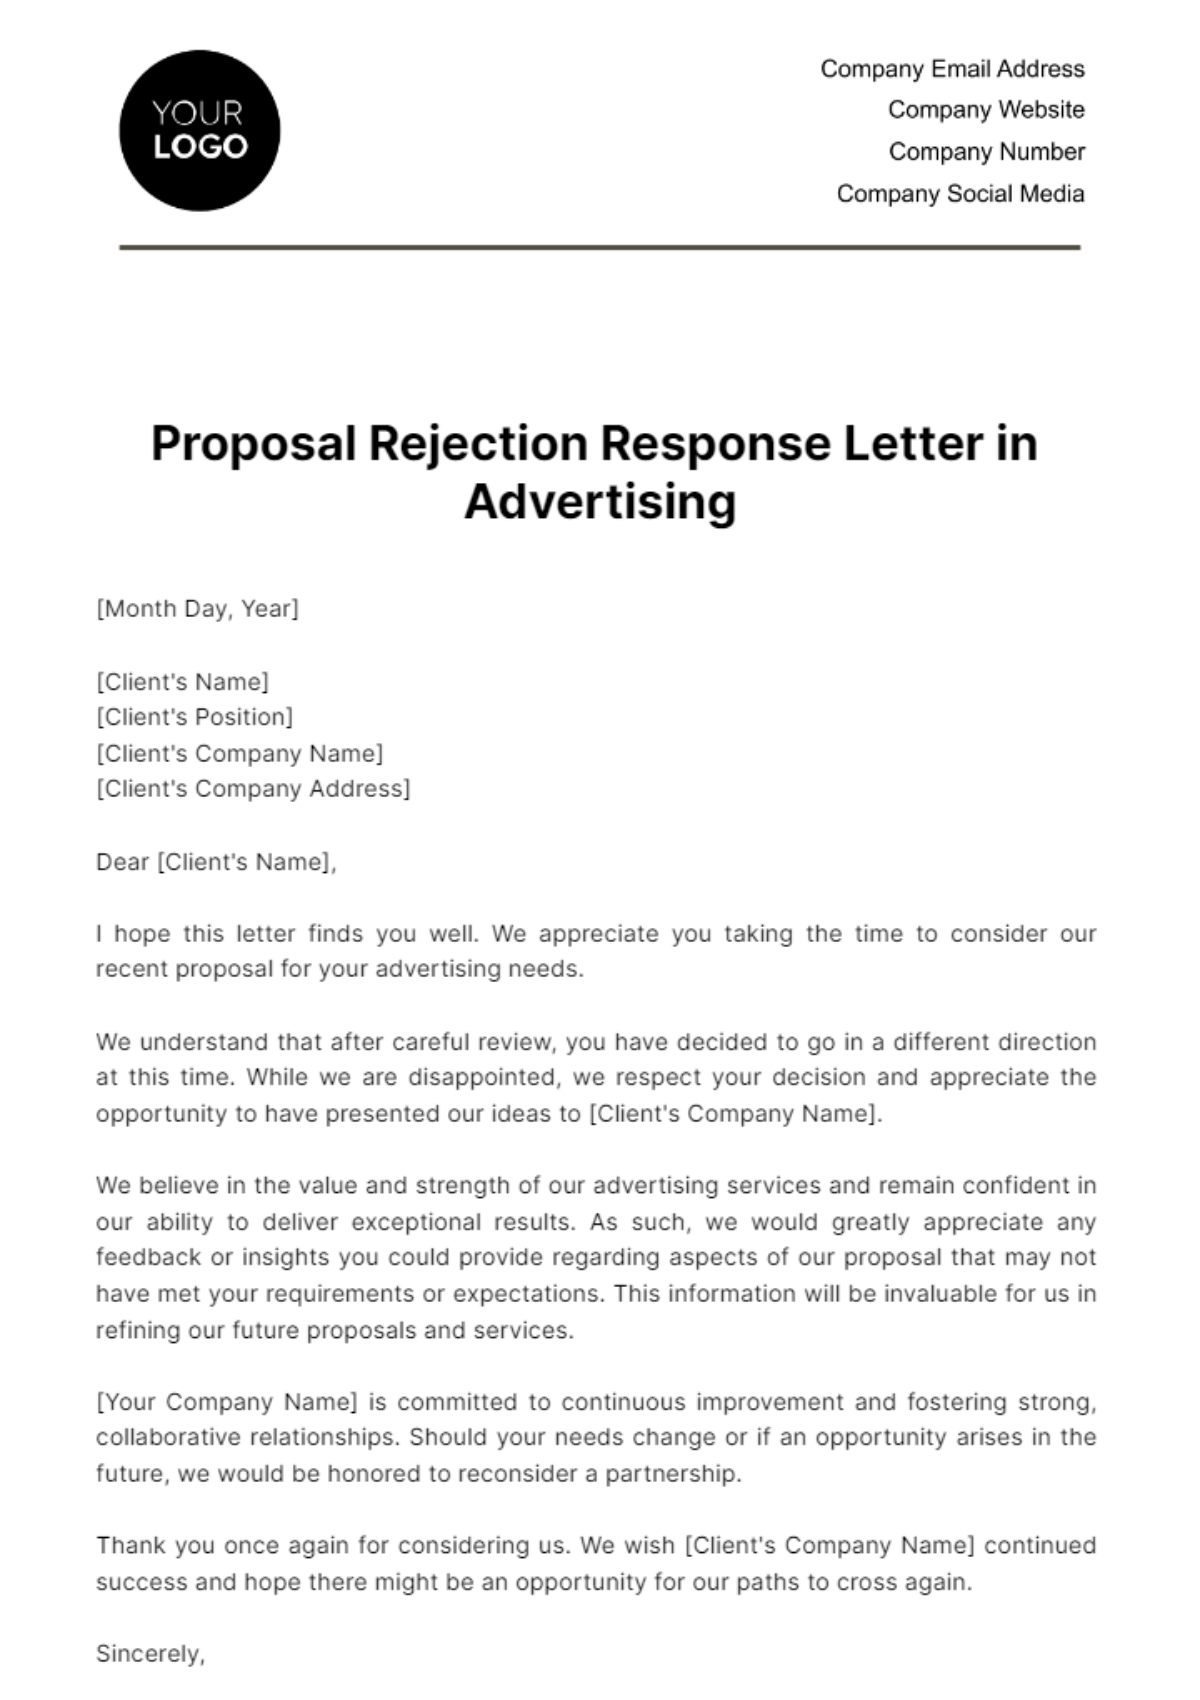 Proposal Rejection Response Letter in Advertising Template